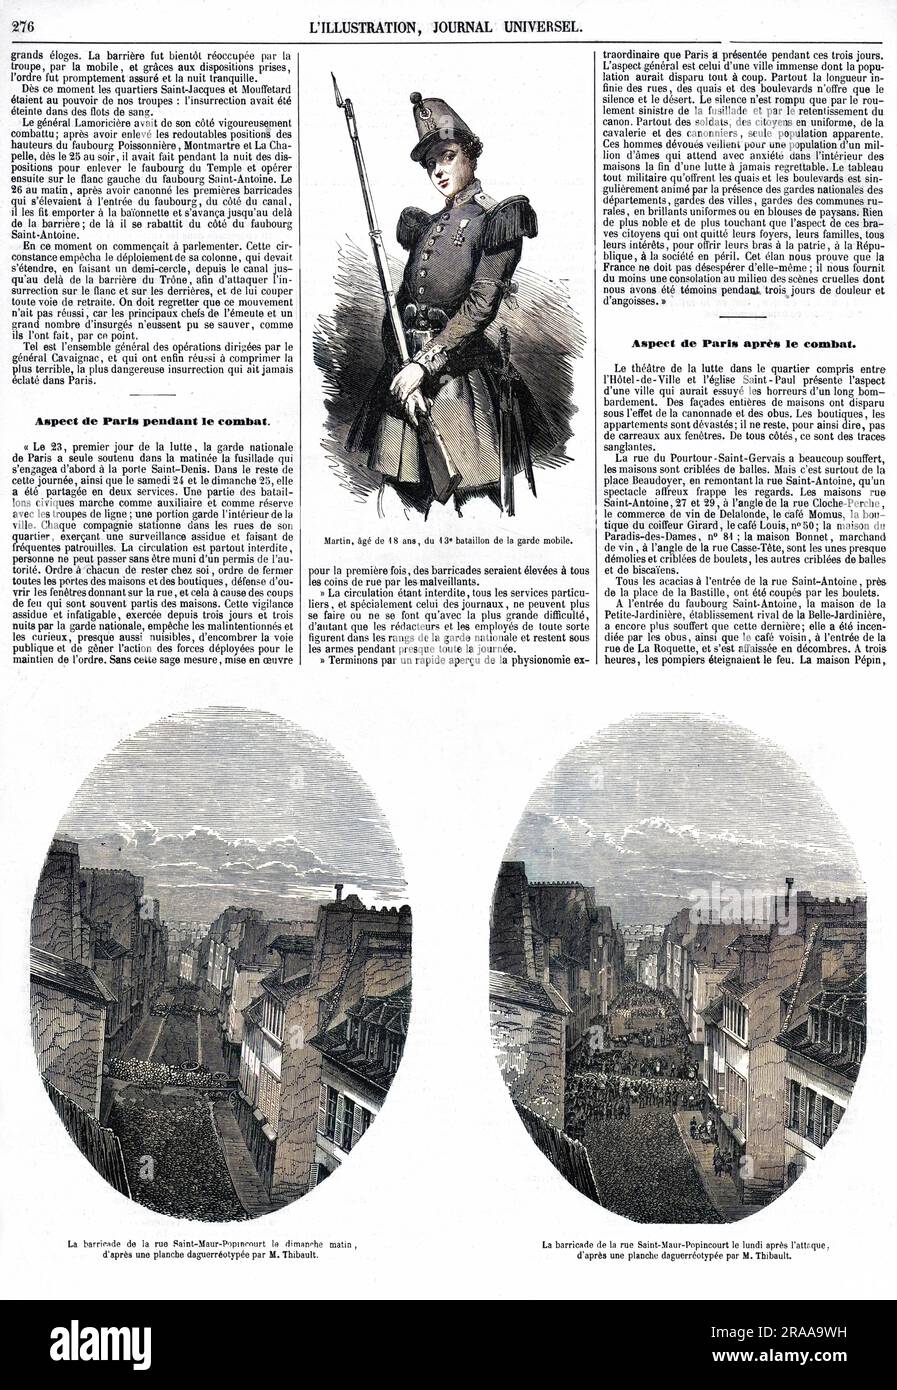 A page from the 1 - 8 July 1848 issue of the French journal L'illustration, which reported at length on the recent uprising in Paris, the 'June Days'. The page includes two engravings adapted from daguerrotypes of the barricades in Rue Saint-Maur, considered to be the first instance of photo-journalism     Date: 1 - 8 July 1848 Stock Photo